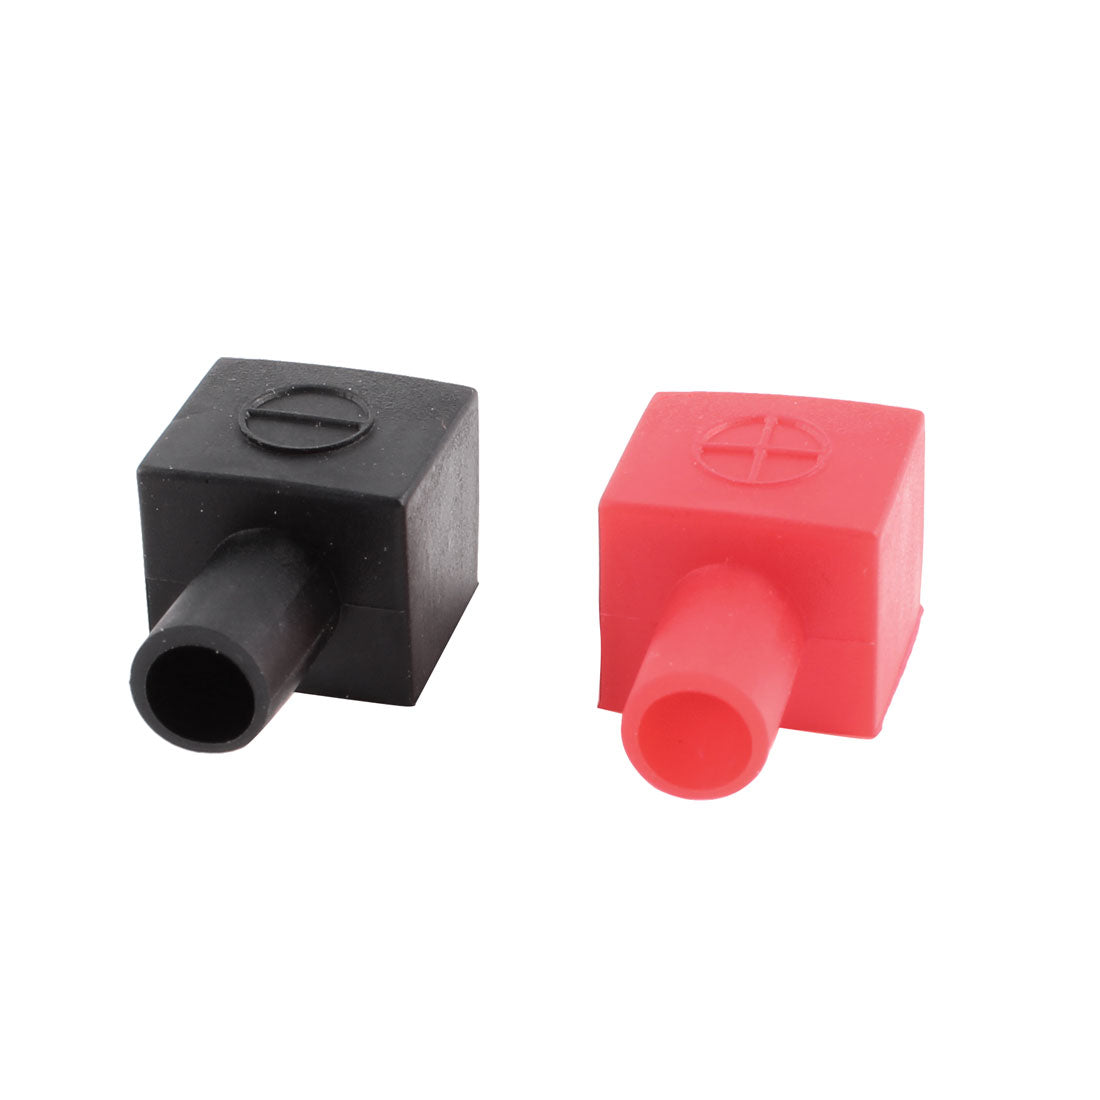 uxcell Uxcell Motorcycle Battery Terminal Cover Soft Plastic Insulation Boot Black Red Pair